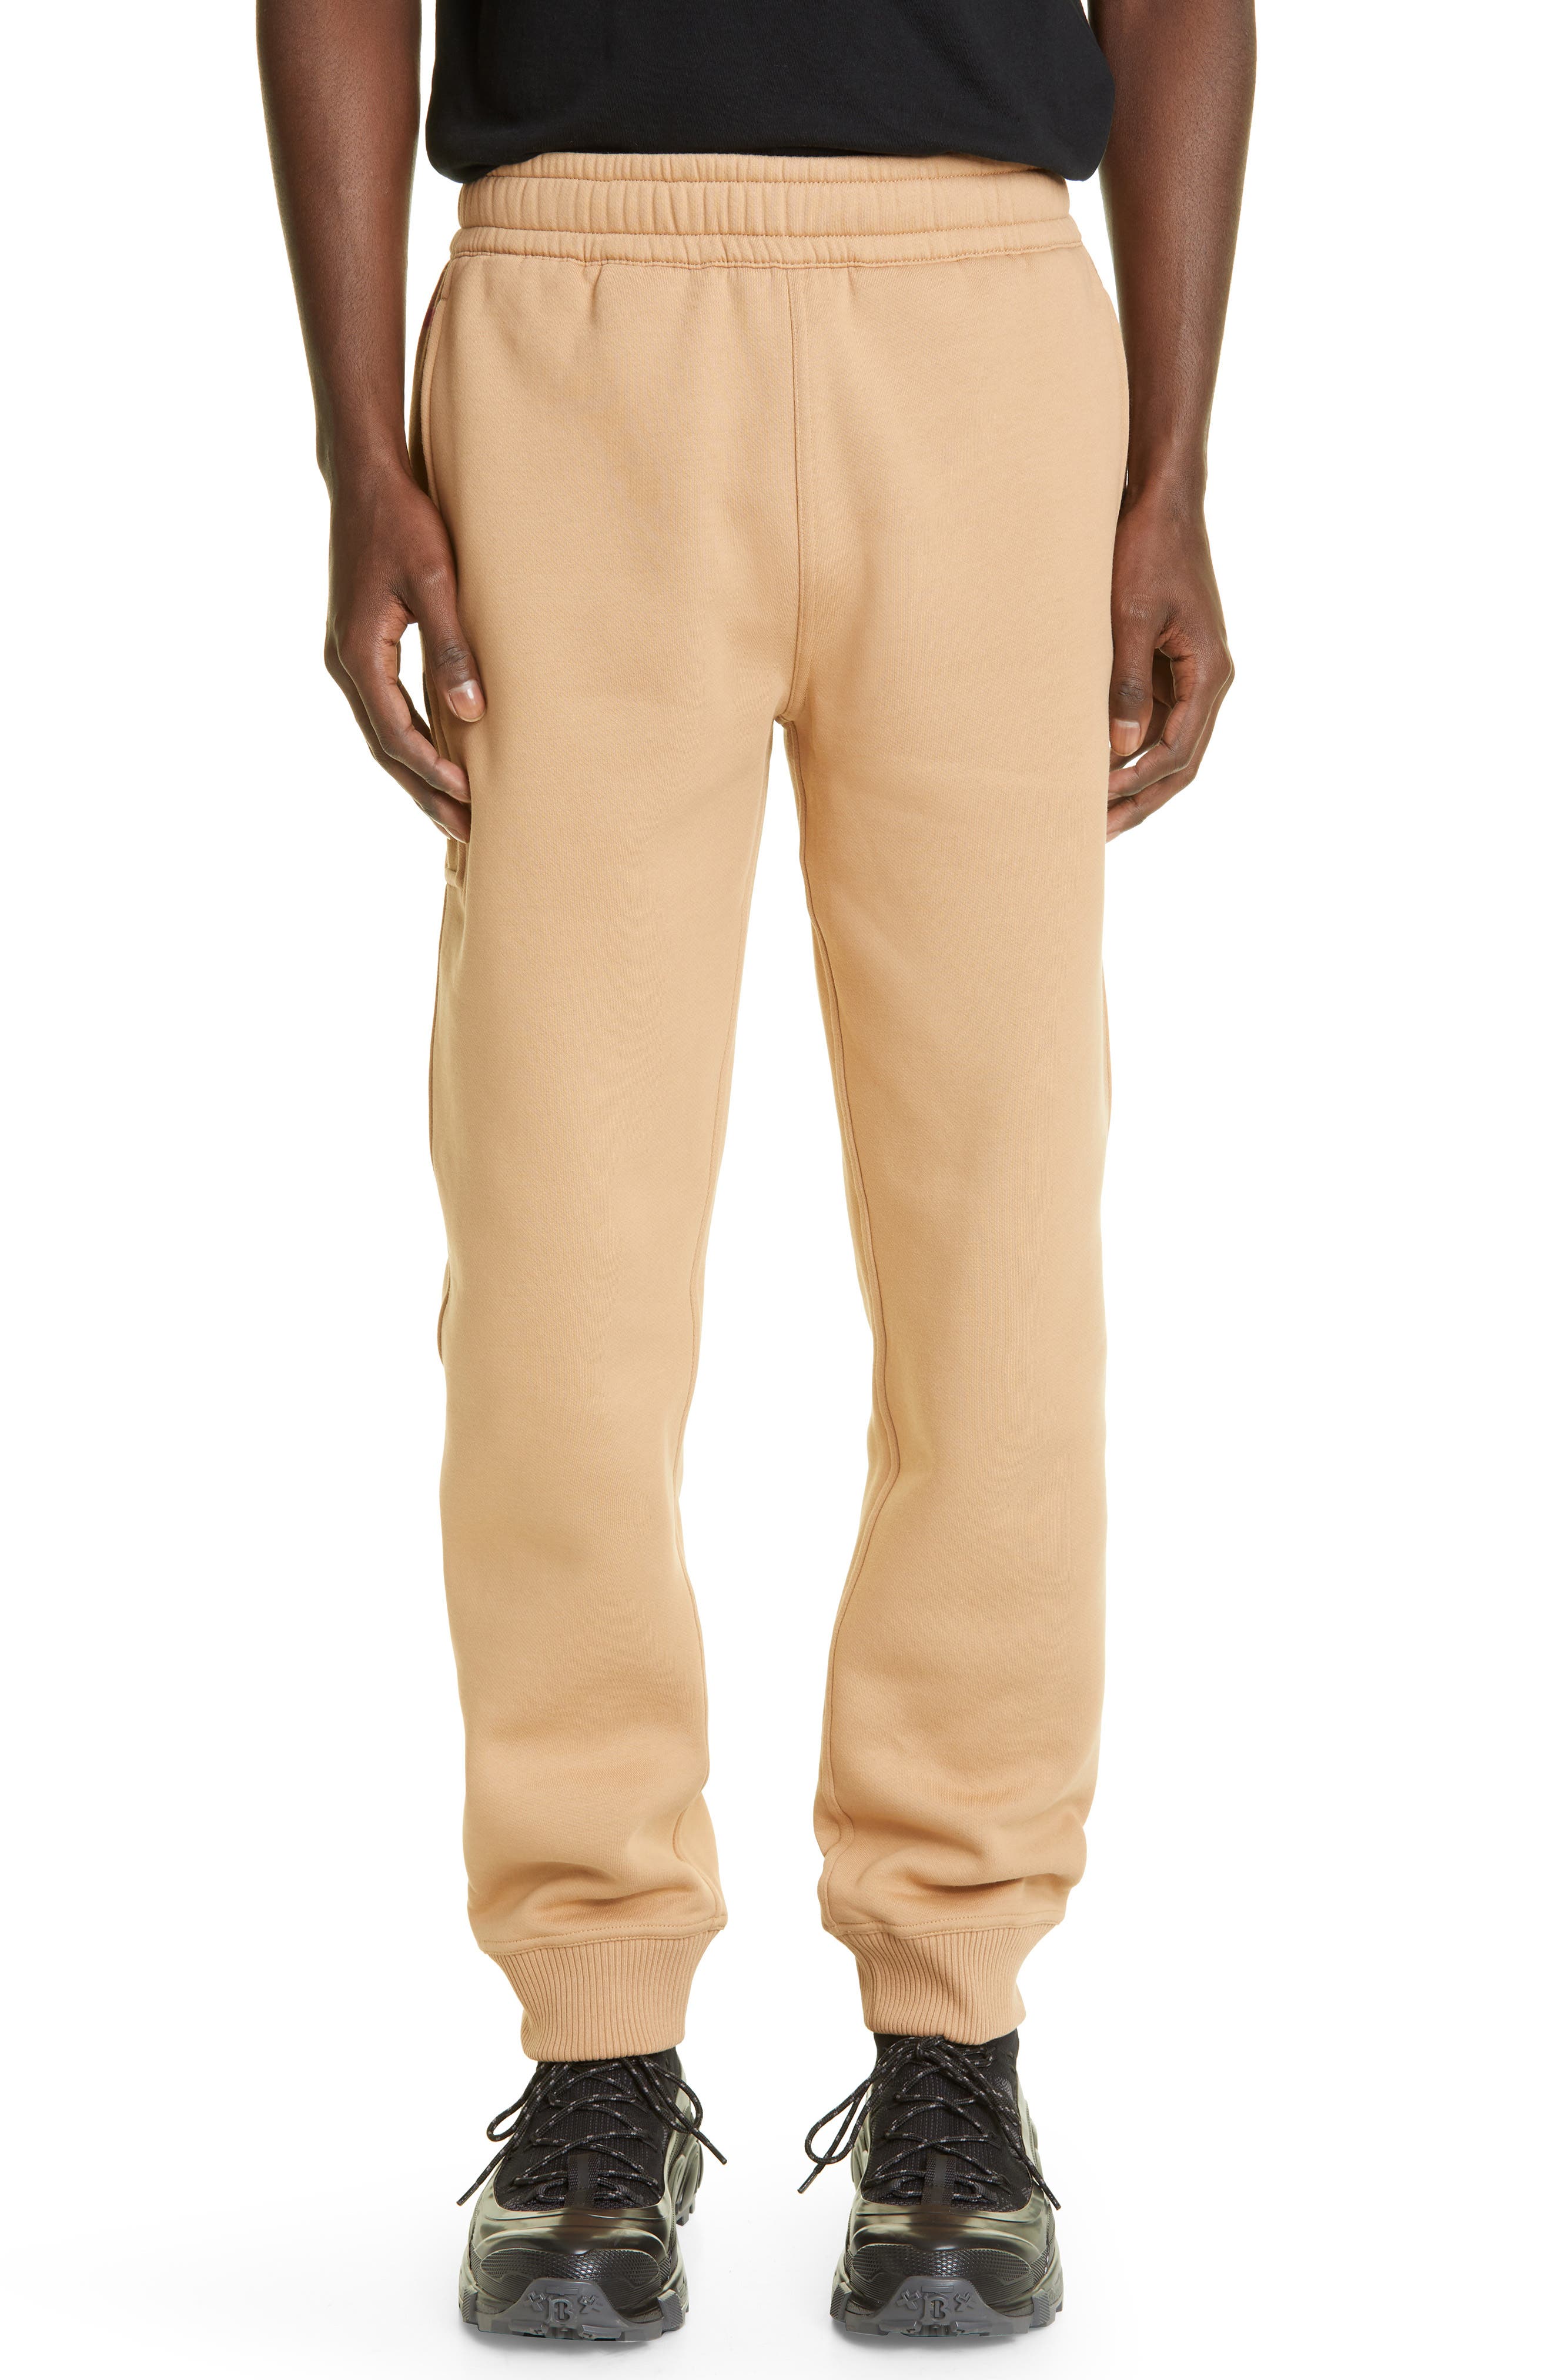 Burberry Check Panel Cotton Blend Joggers in Pale Grey Melange at Nordstrom